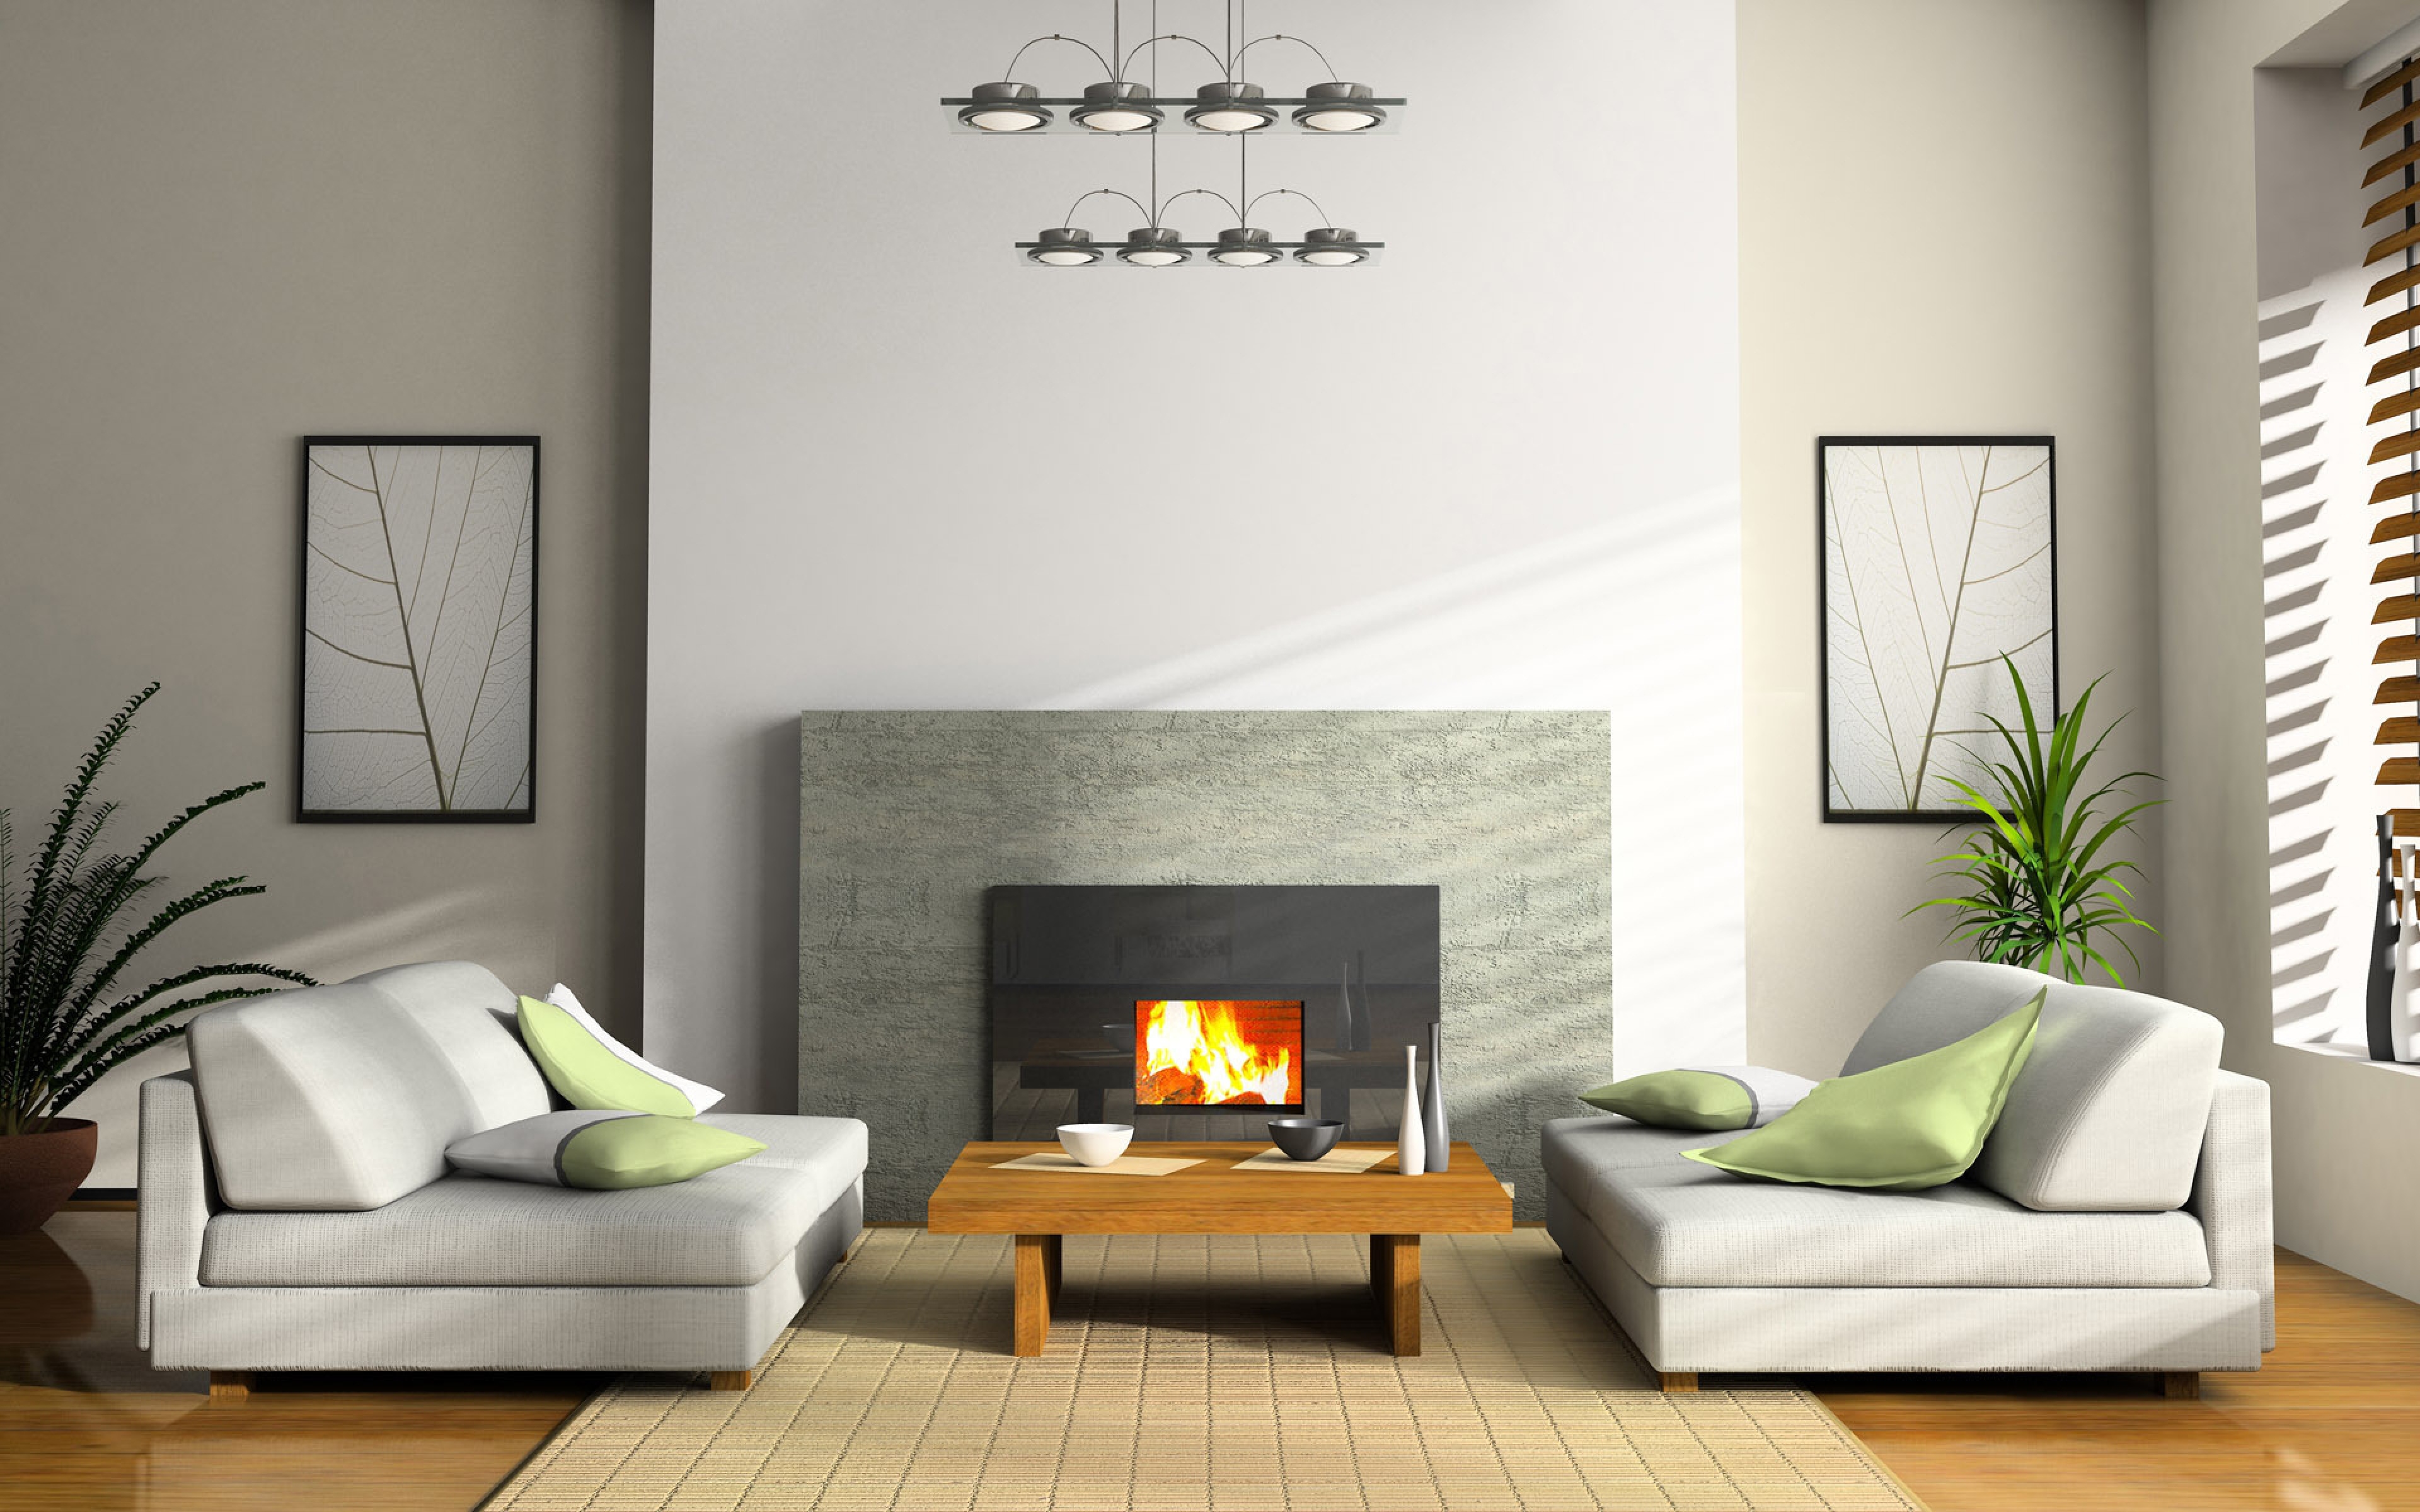 How to get a Stylish Winter Living Room with Fireplaces